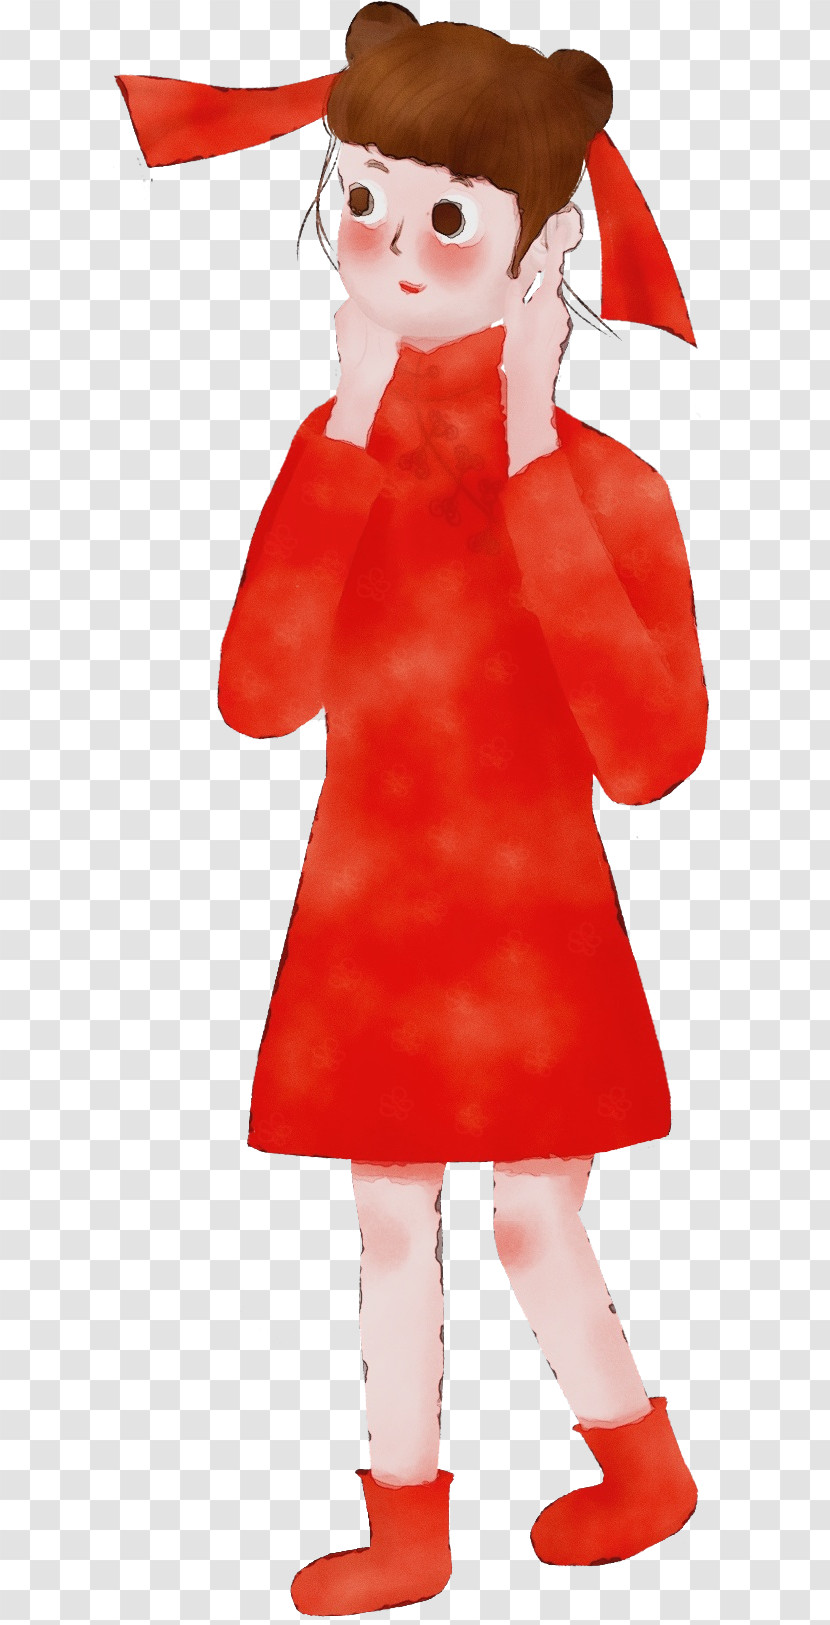 Clothing Red Costume Outerwear Dress Transparent PNG